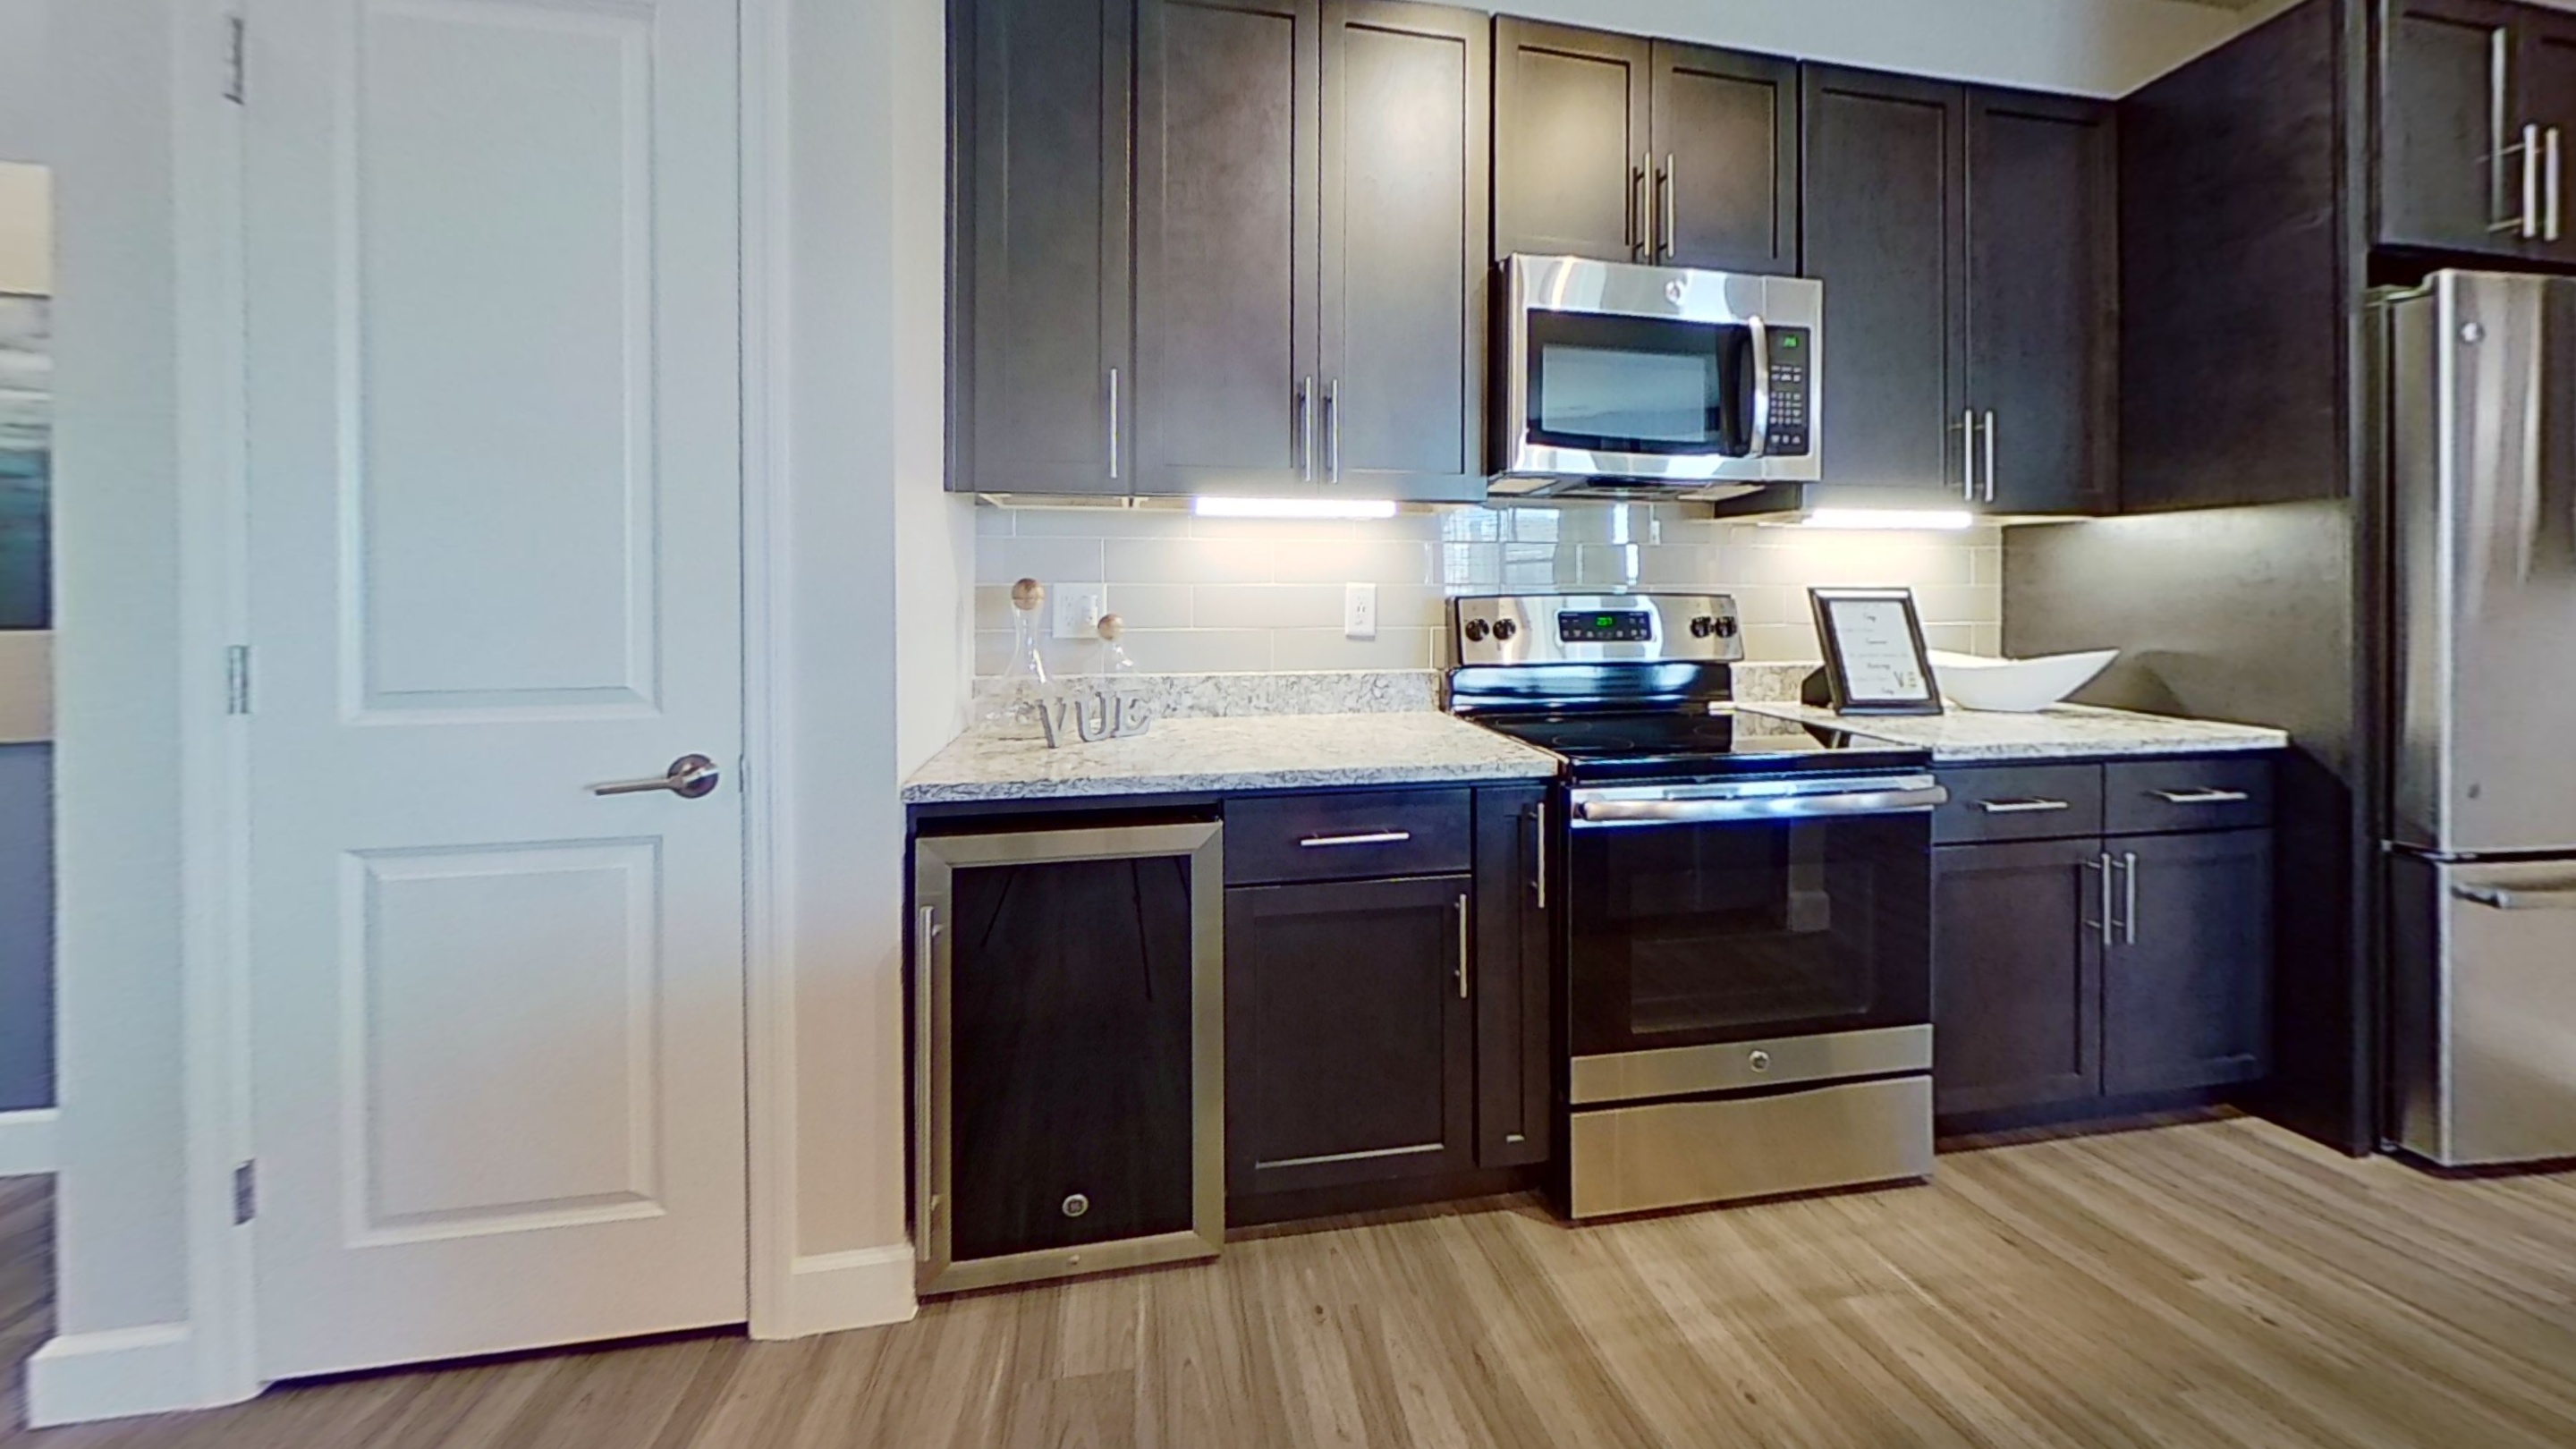 A3 Unit Kitchen at the Vue at Creve Coeur Apartments in Creve Coeur, MO